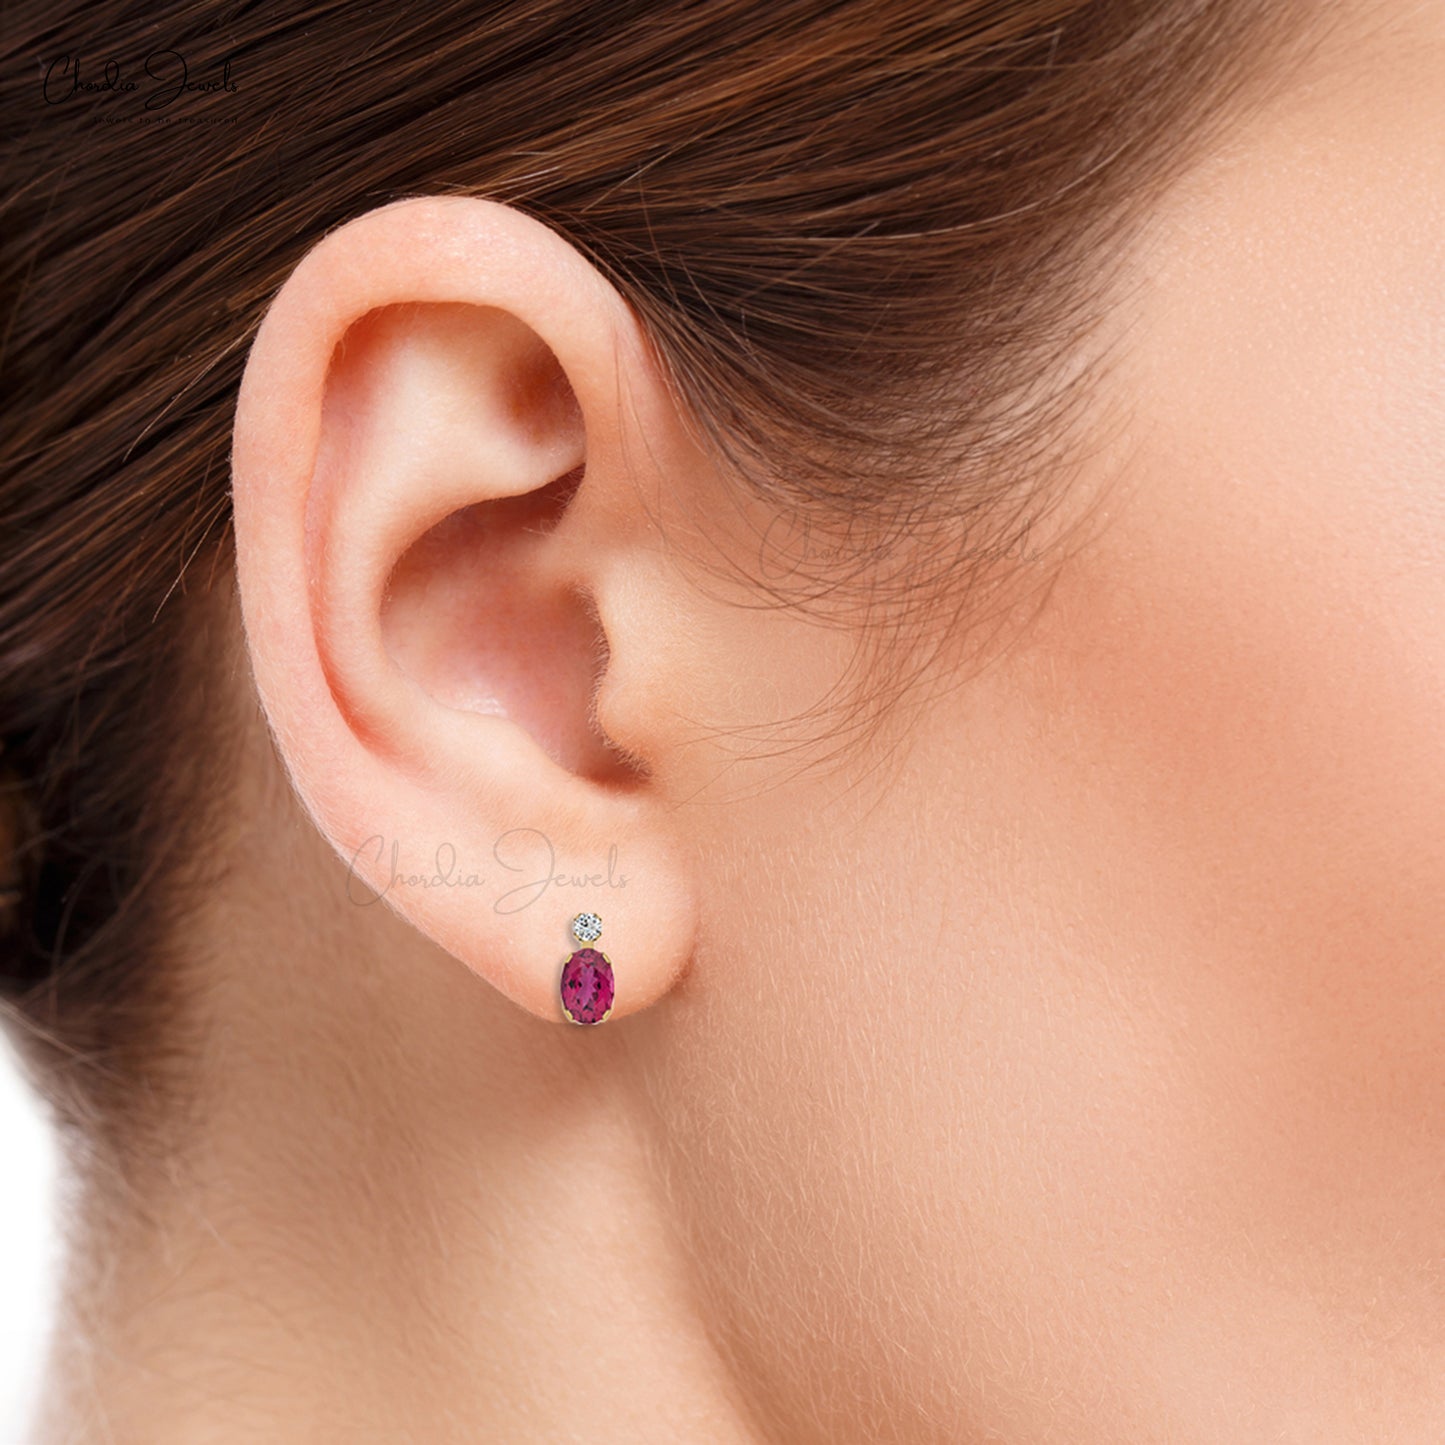 Load image into Gallery viewer, Genuine 14K Gold Pink Tourmaline Diamond Stud Earrings For Gift
